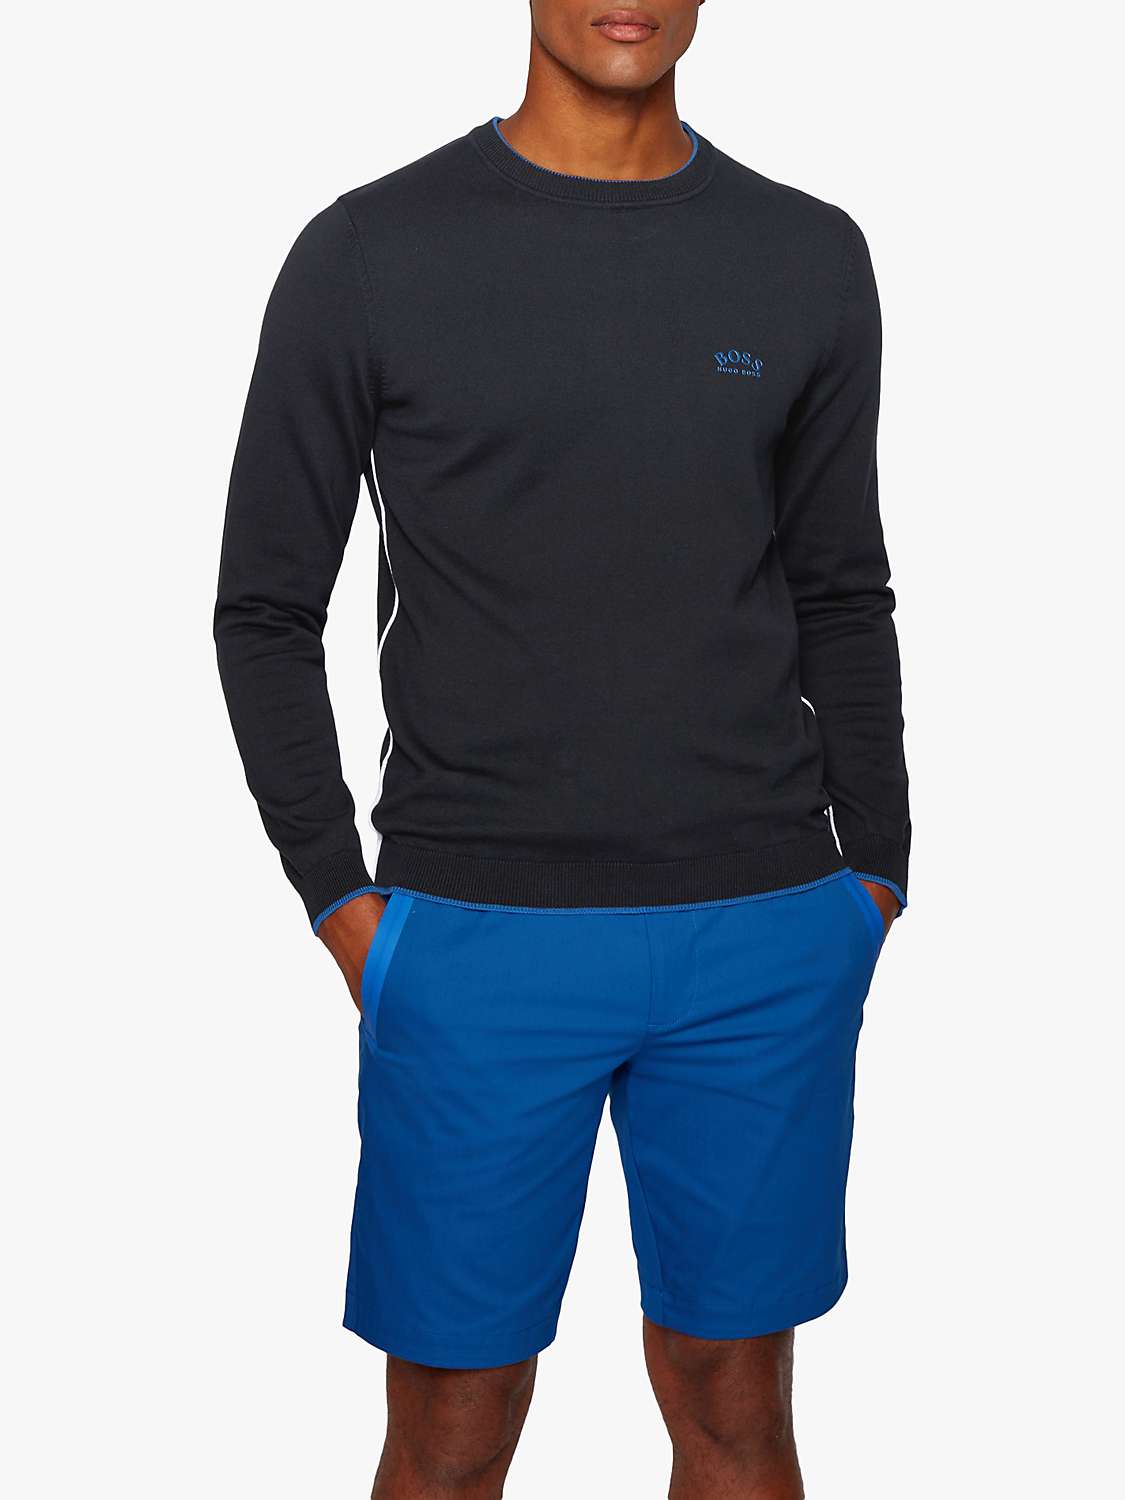 Buy BOSS Riston Contrast Piping Jumper Online at johnlewis.com